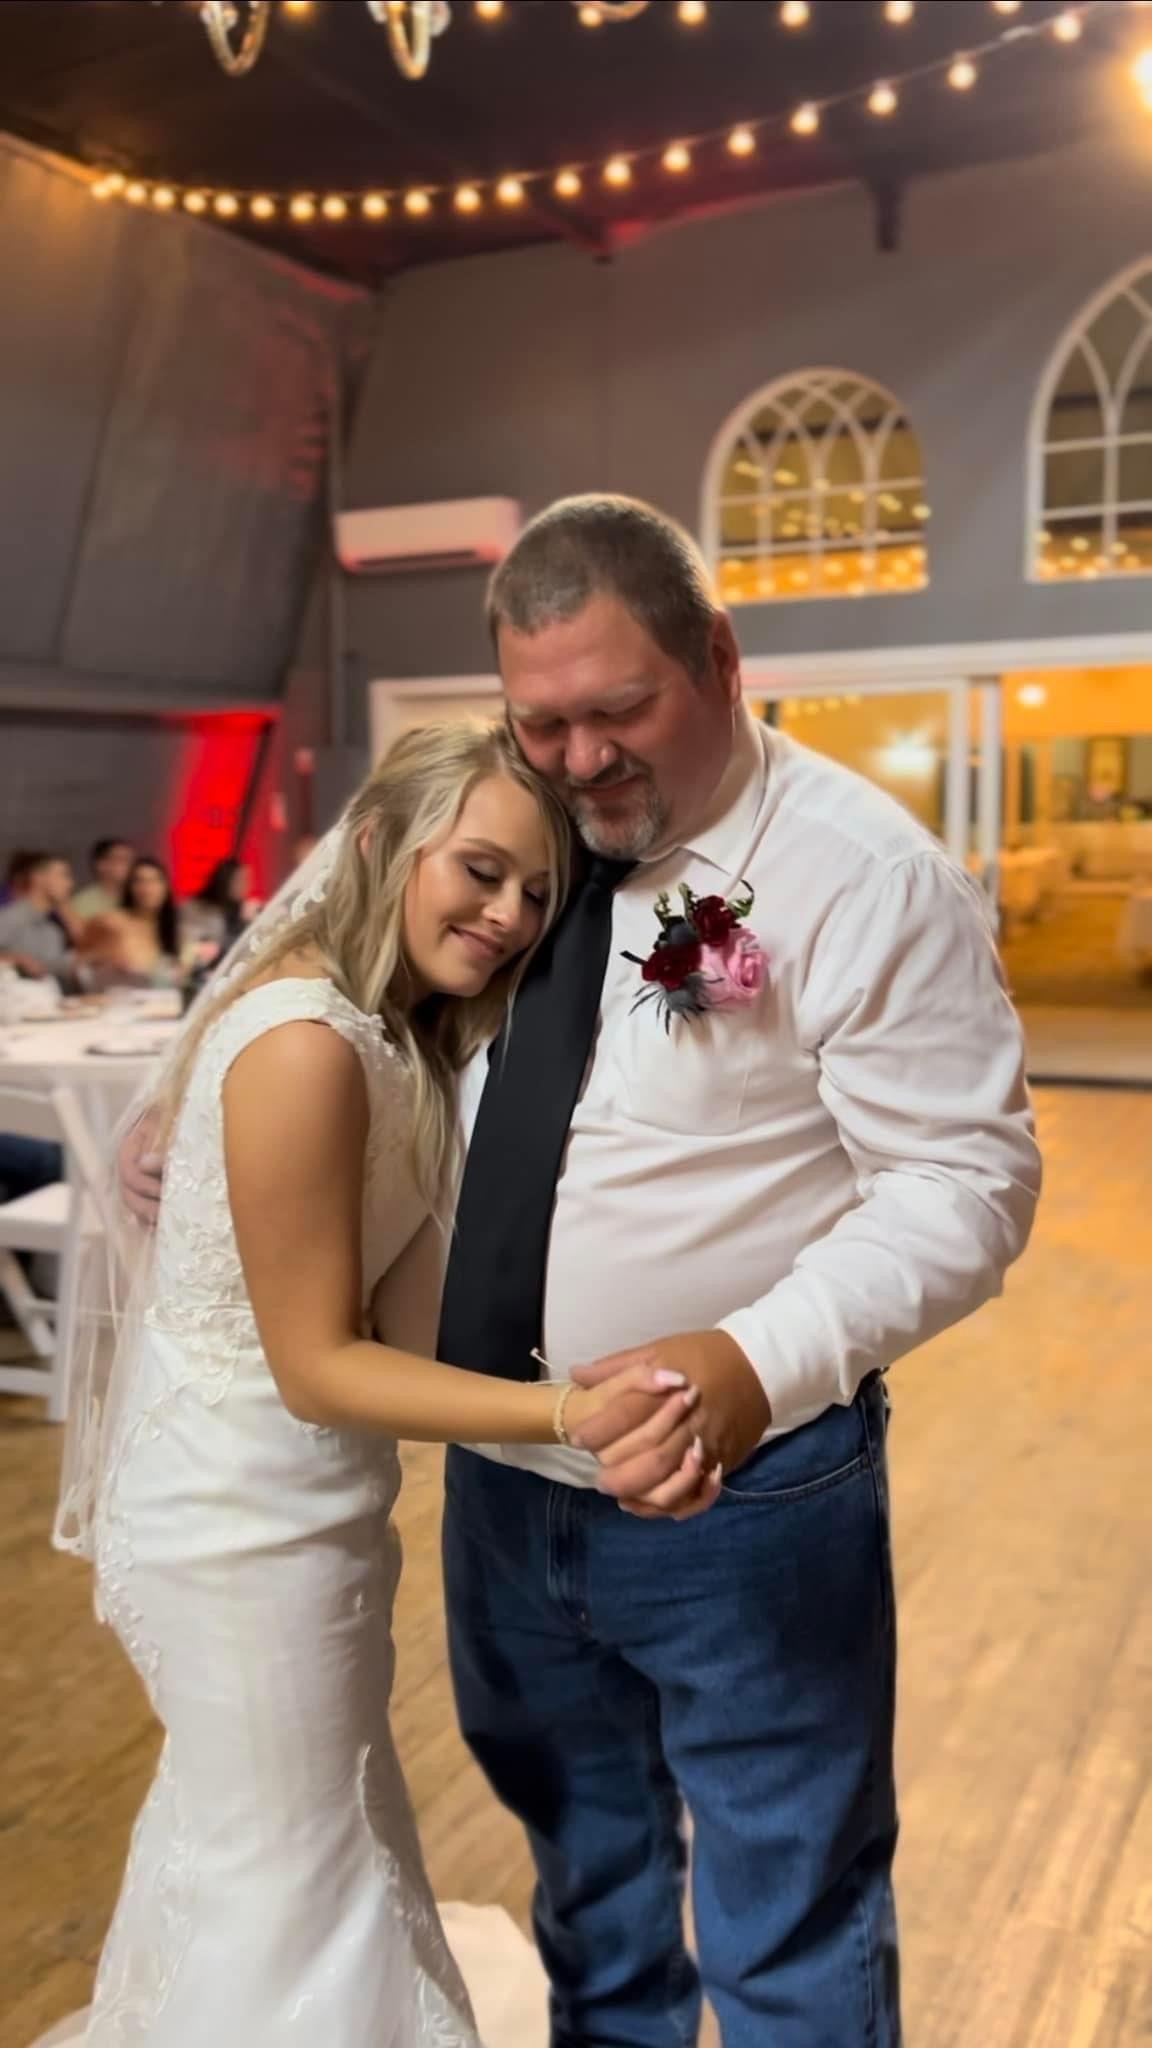 Caitlin and her father enjoy a Father-Daughter dance